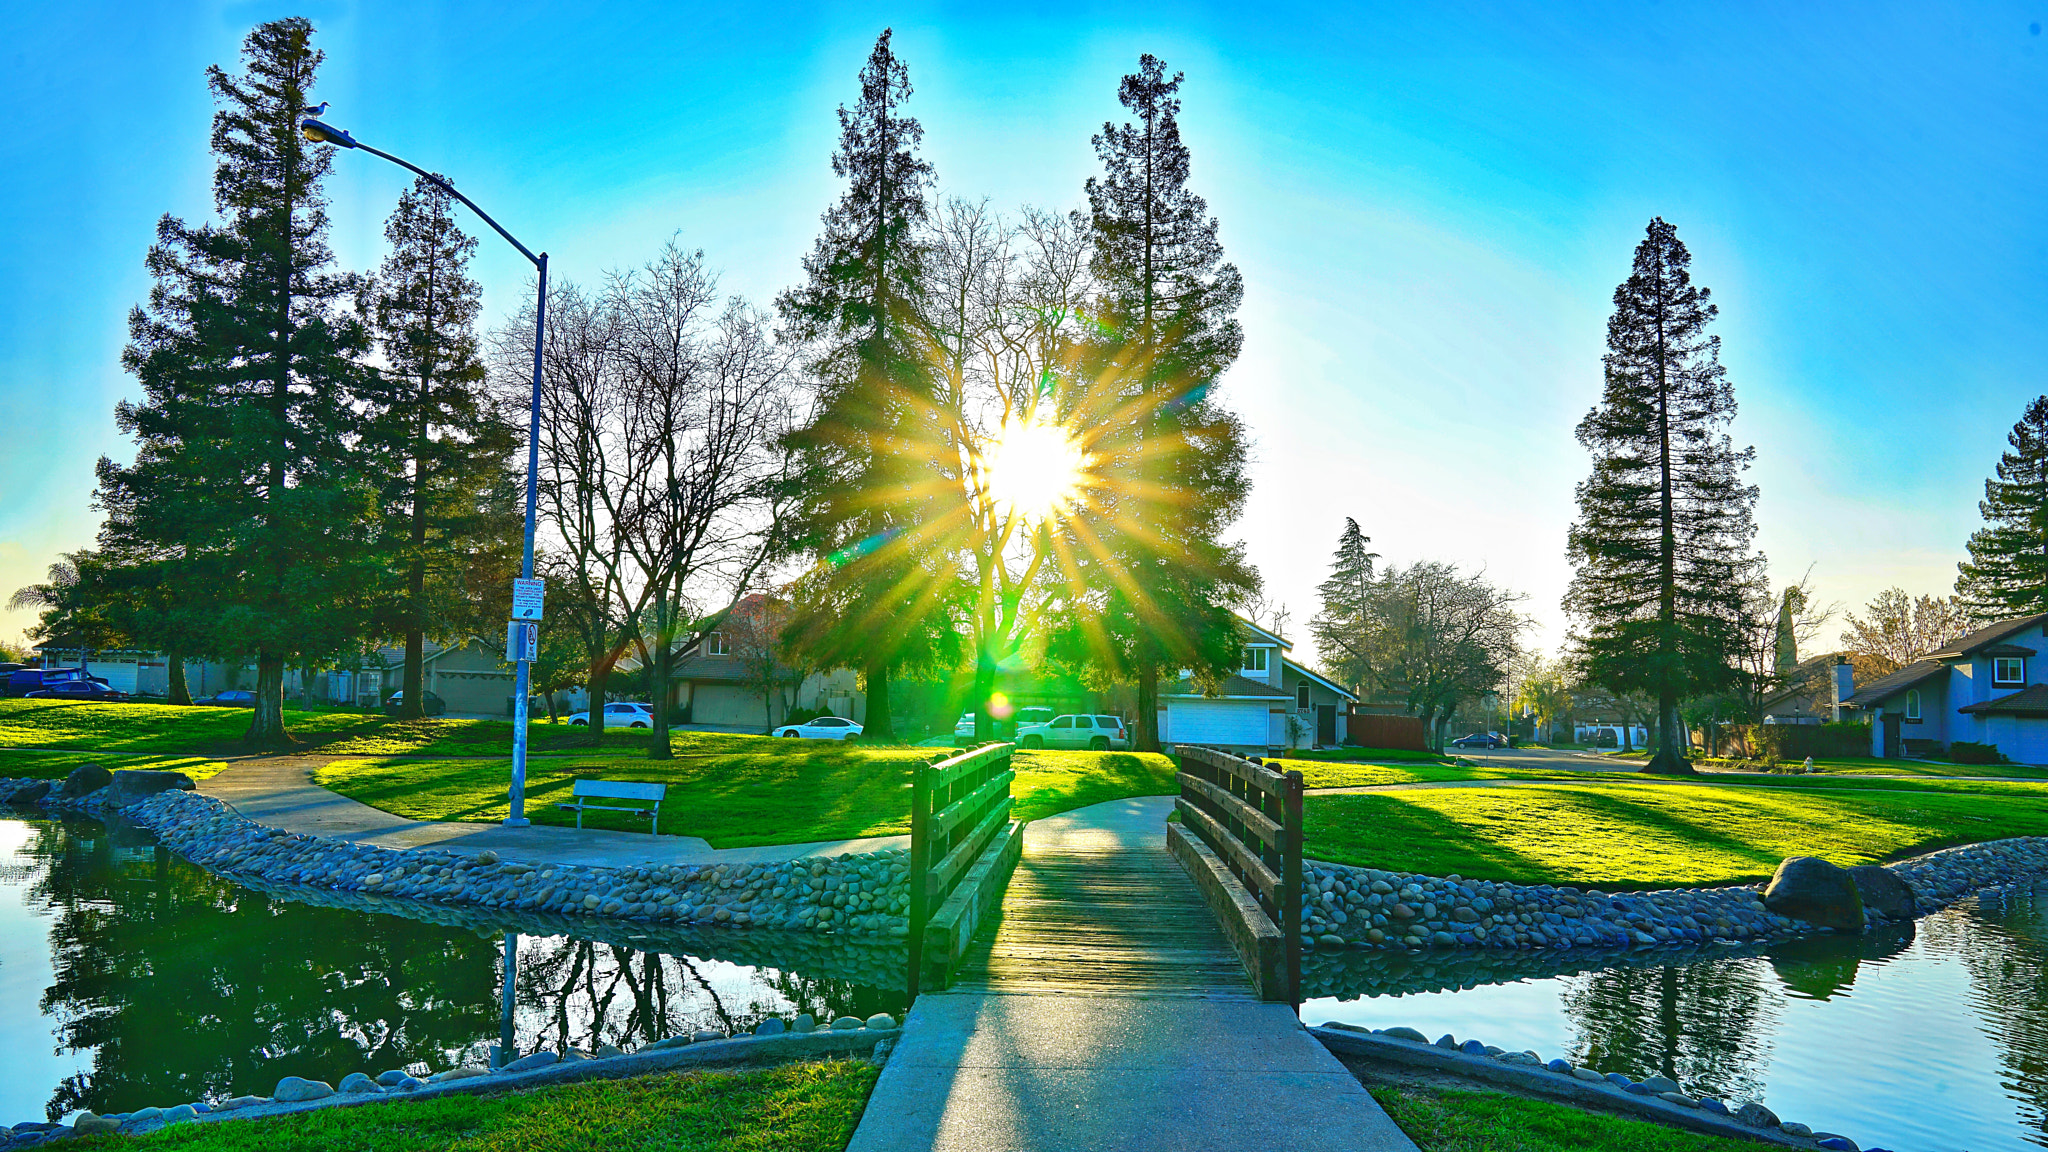 Sony a7R II sample photo. Panella park in my hometown of stockton, ca. natur ... photography